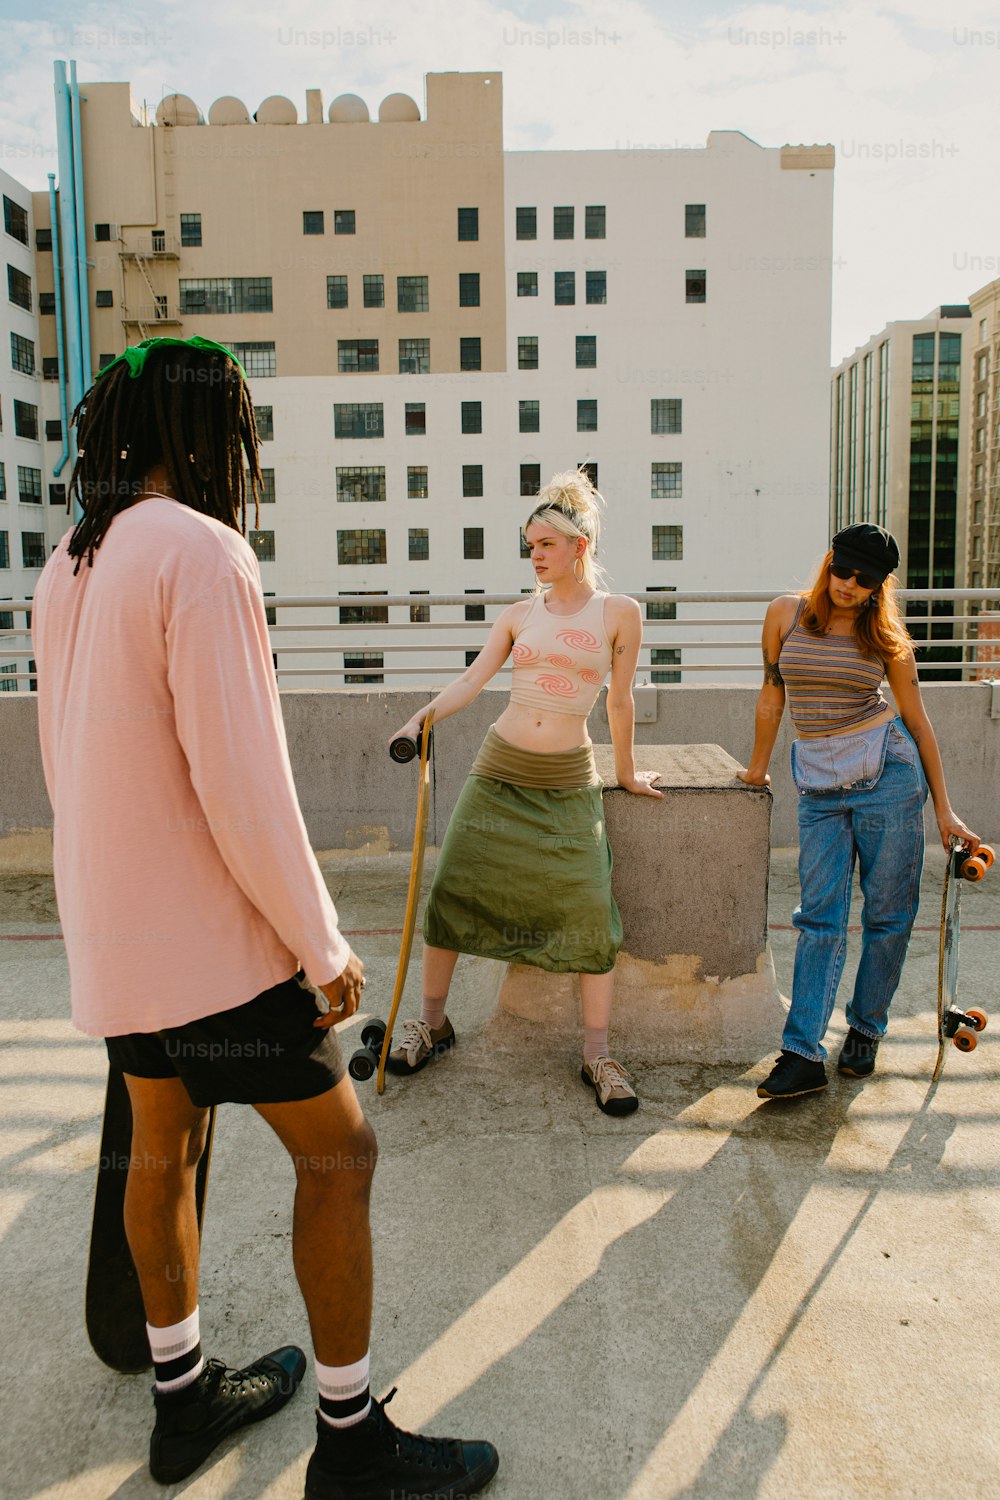 a group of people with skateboards and walking sticks